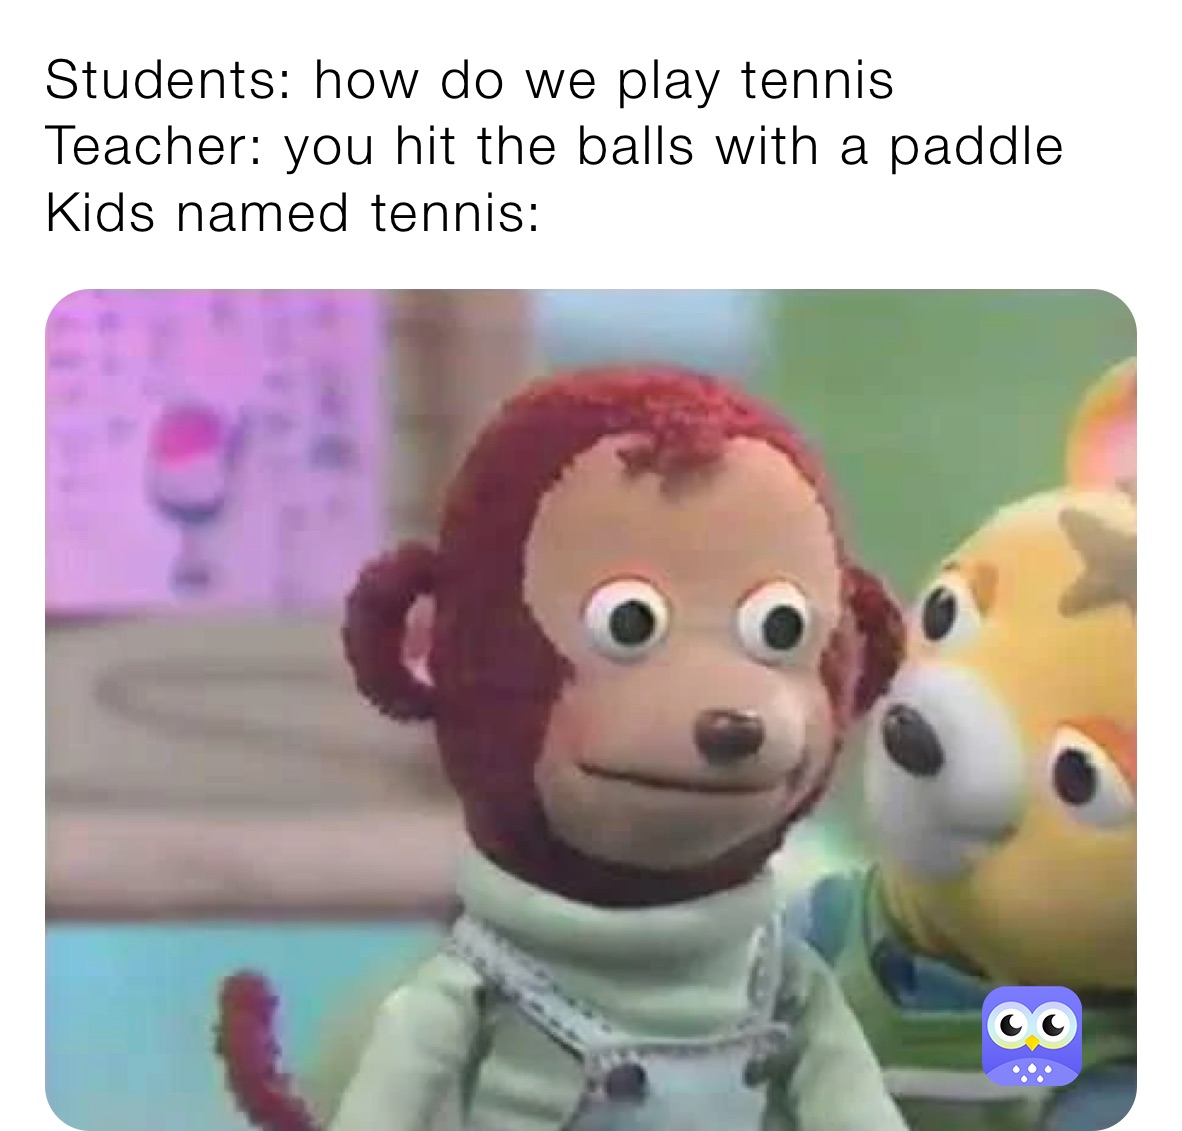 Students: how do we play tennis
Teacher: you hit the balls with a paddle
Kids named tennis: